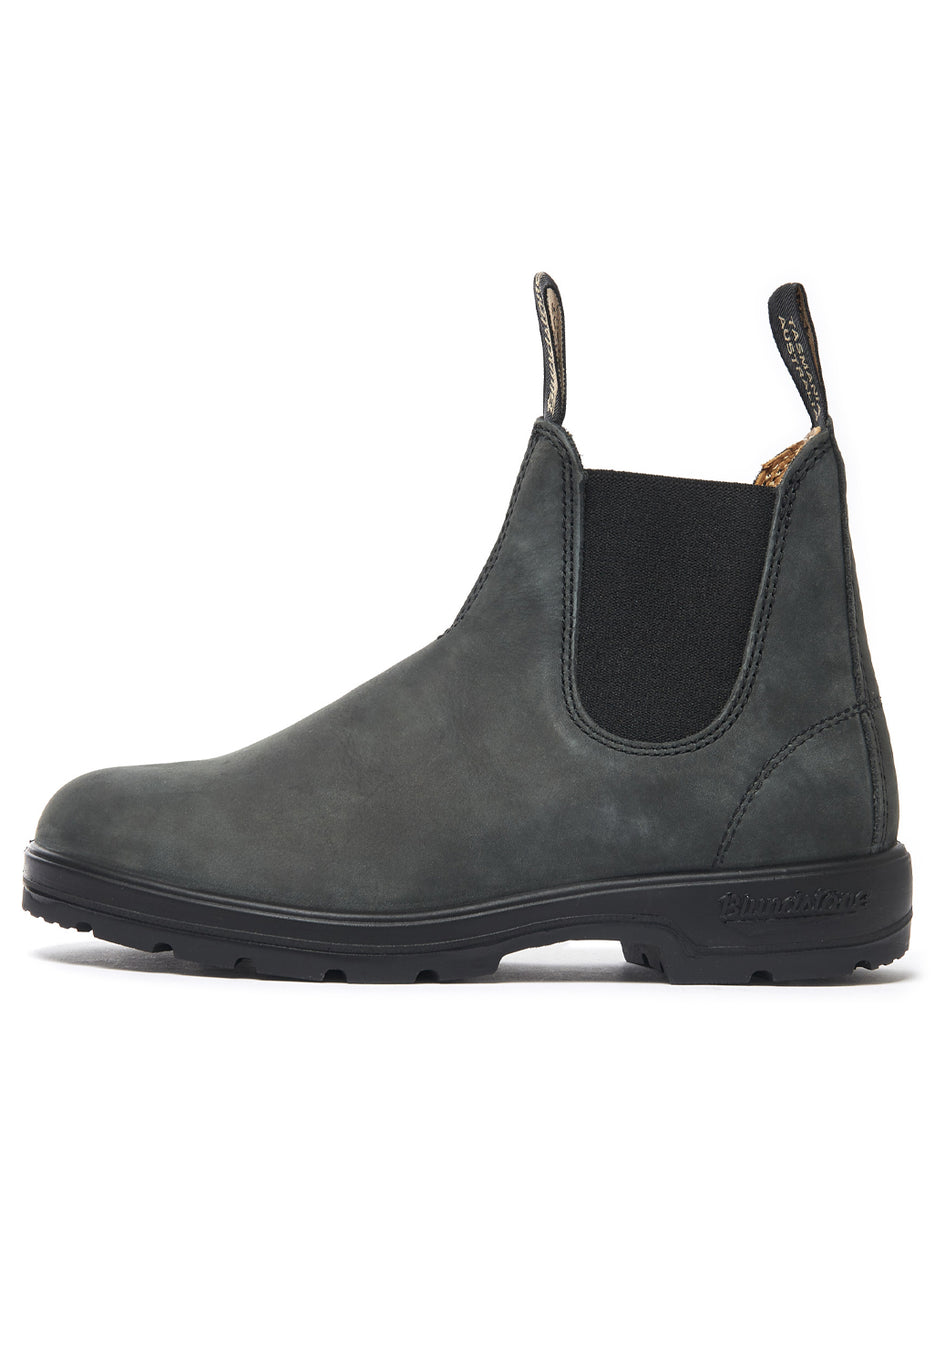 Blundstone 587 Boots 1